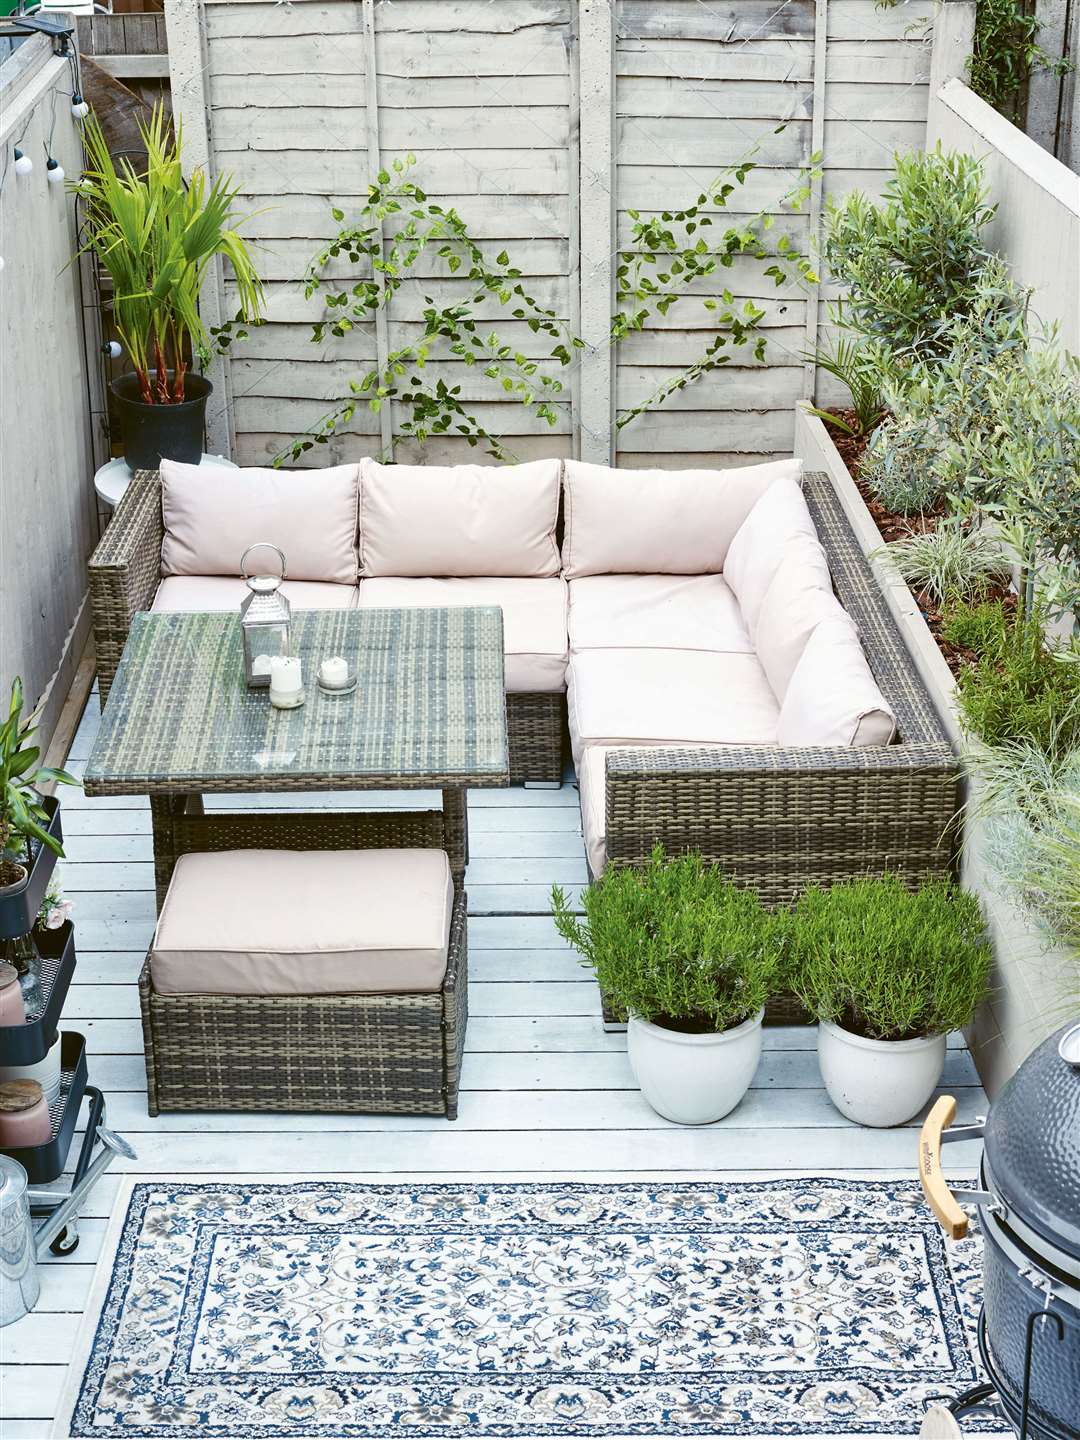 A small garden can be turned into an outdoor room. Picture: Jason Ingram/Mitchell Beazley/PA